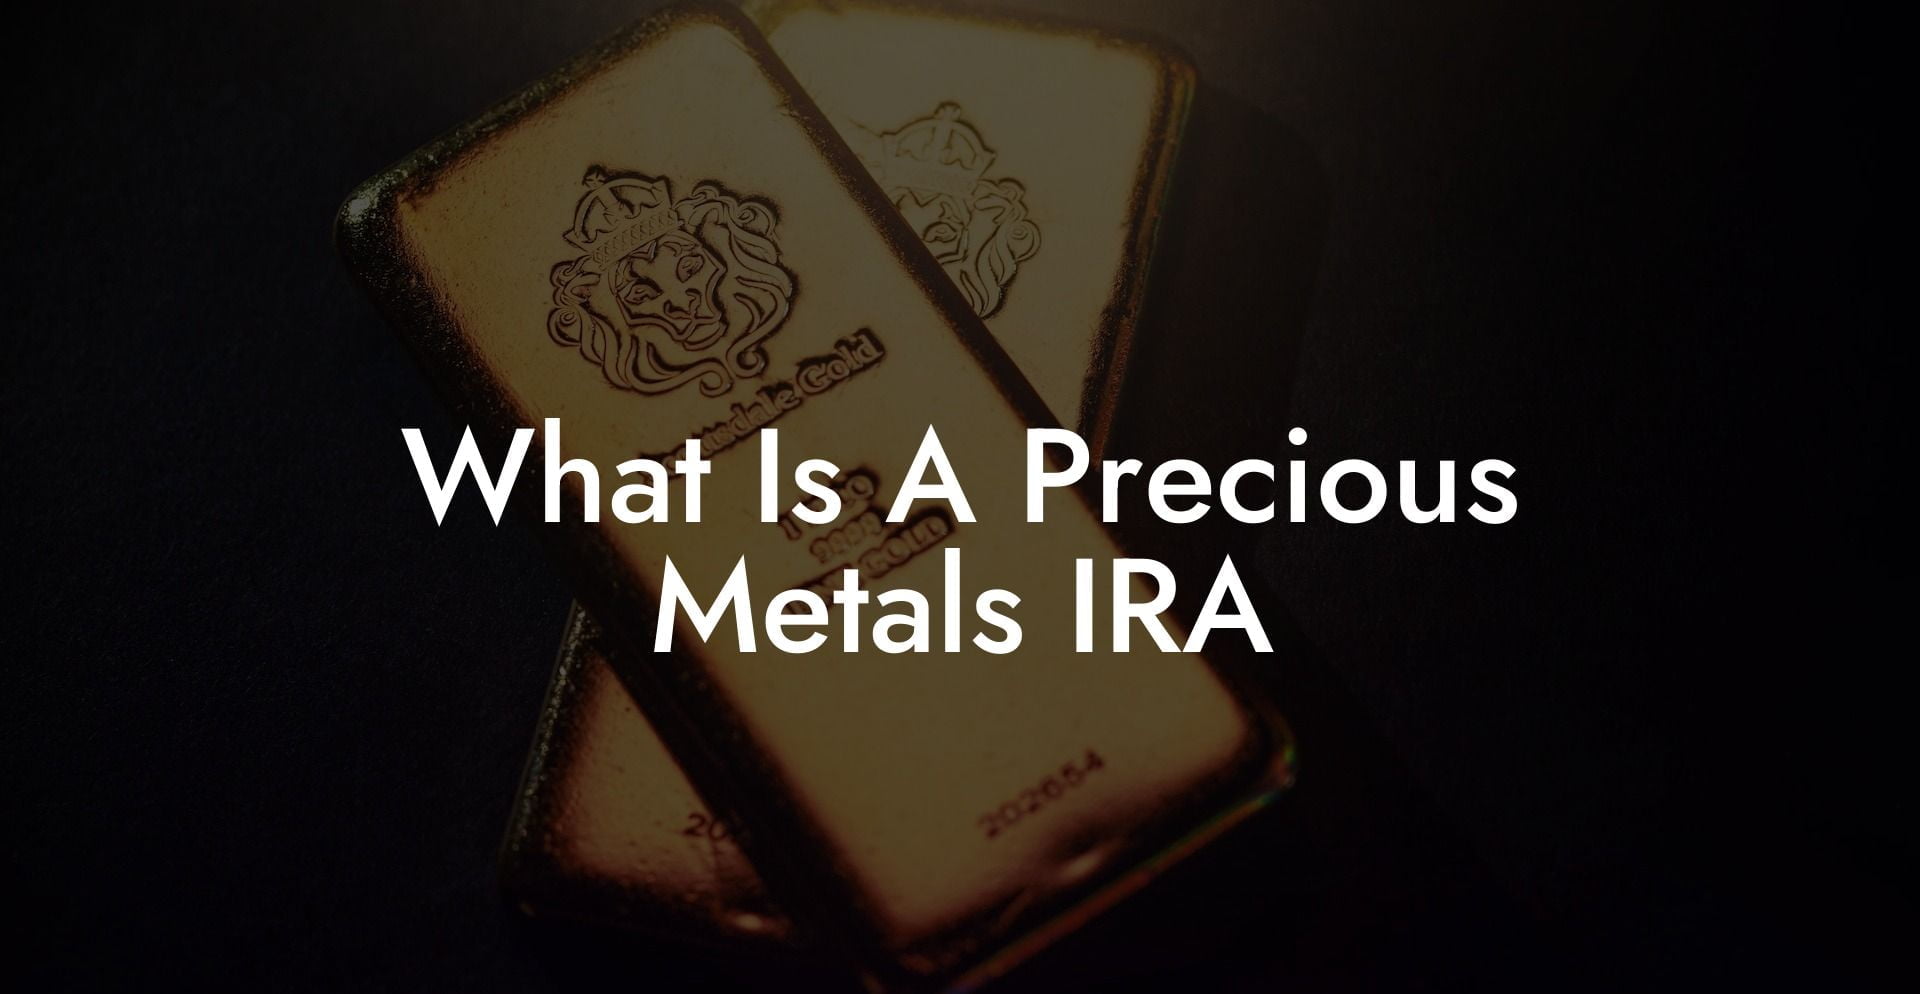 What Is A Precious Metals IRA